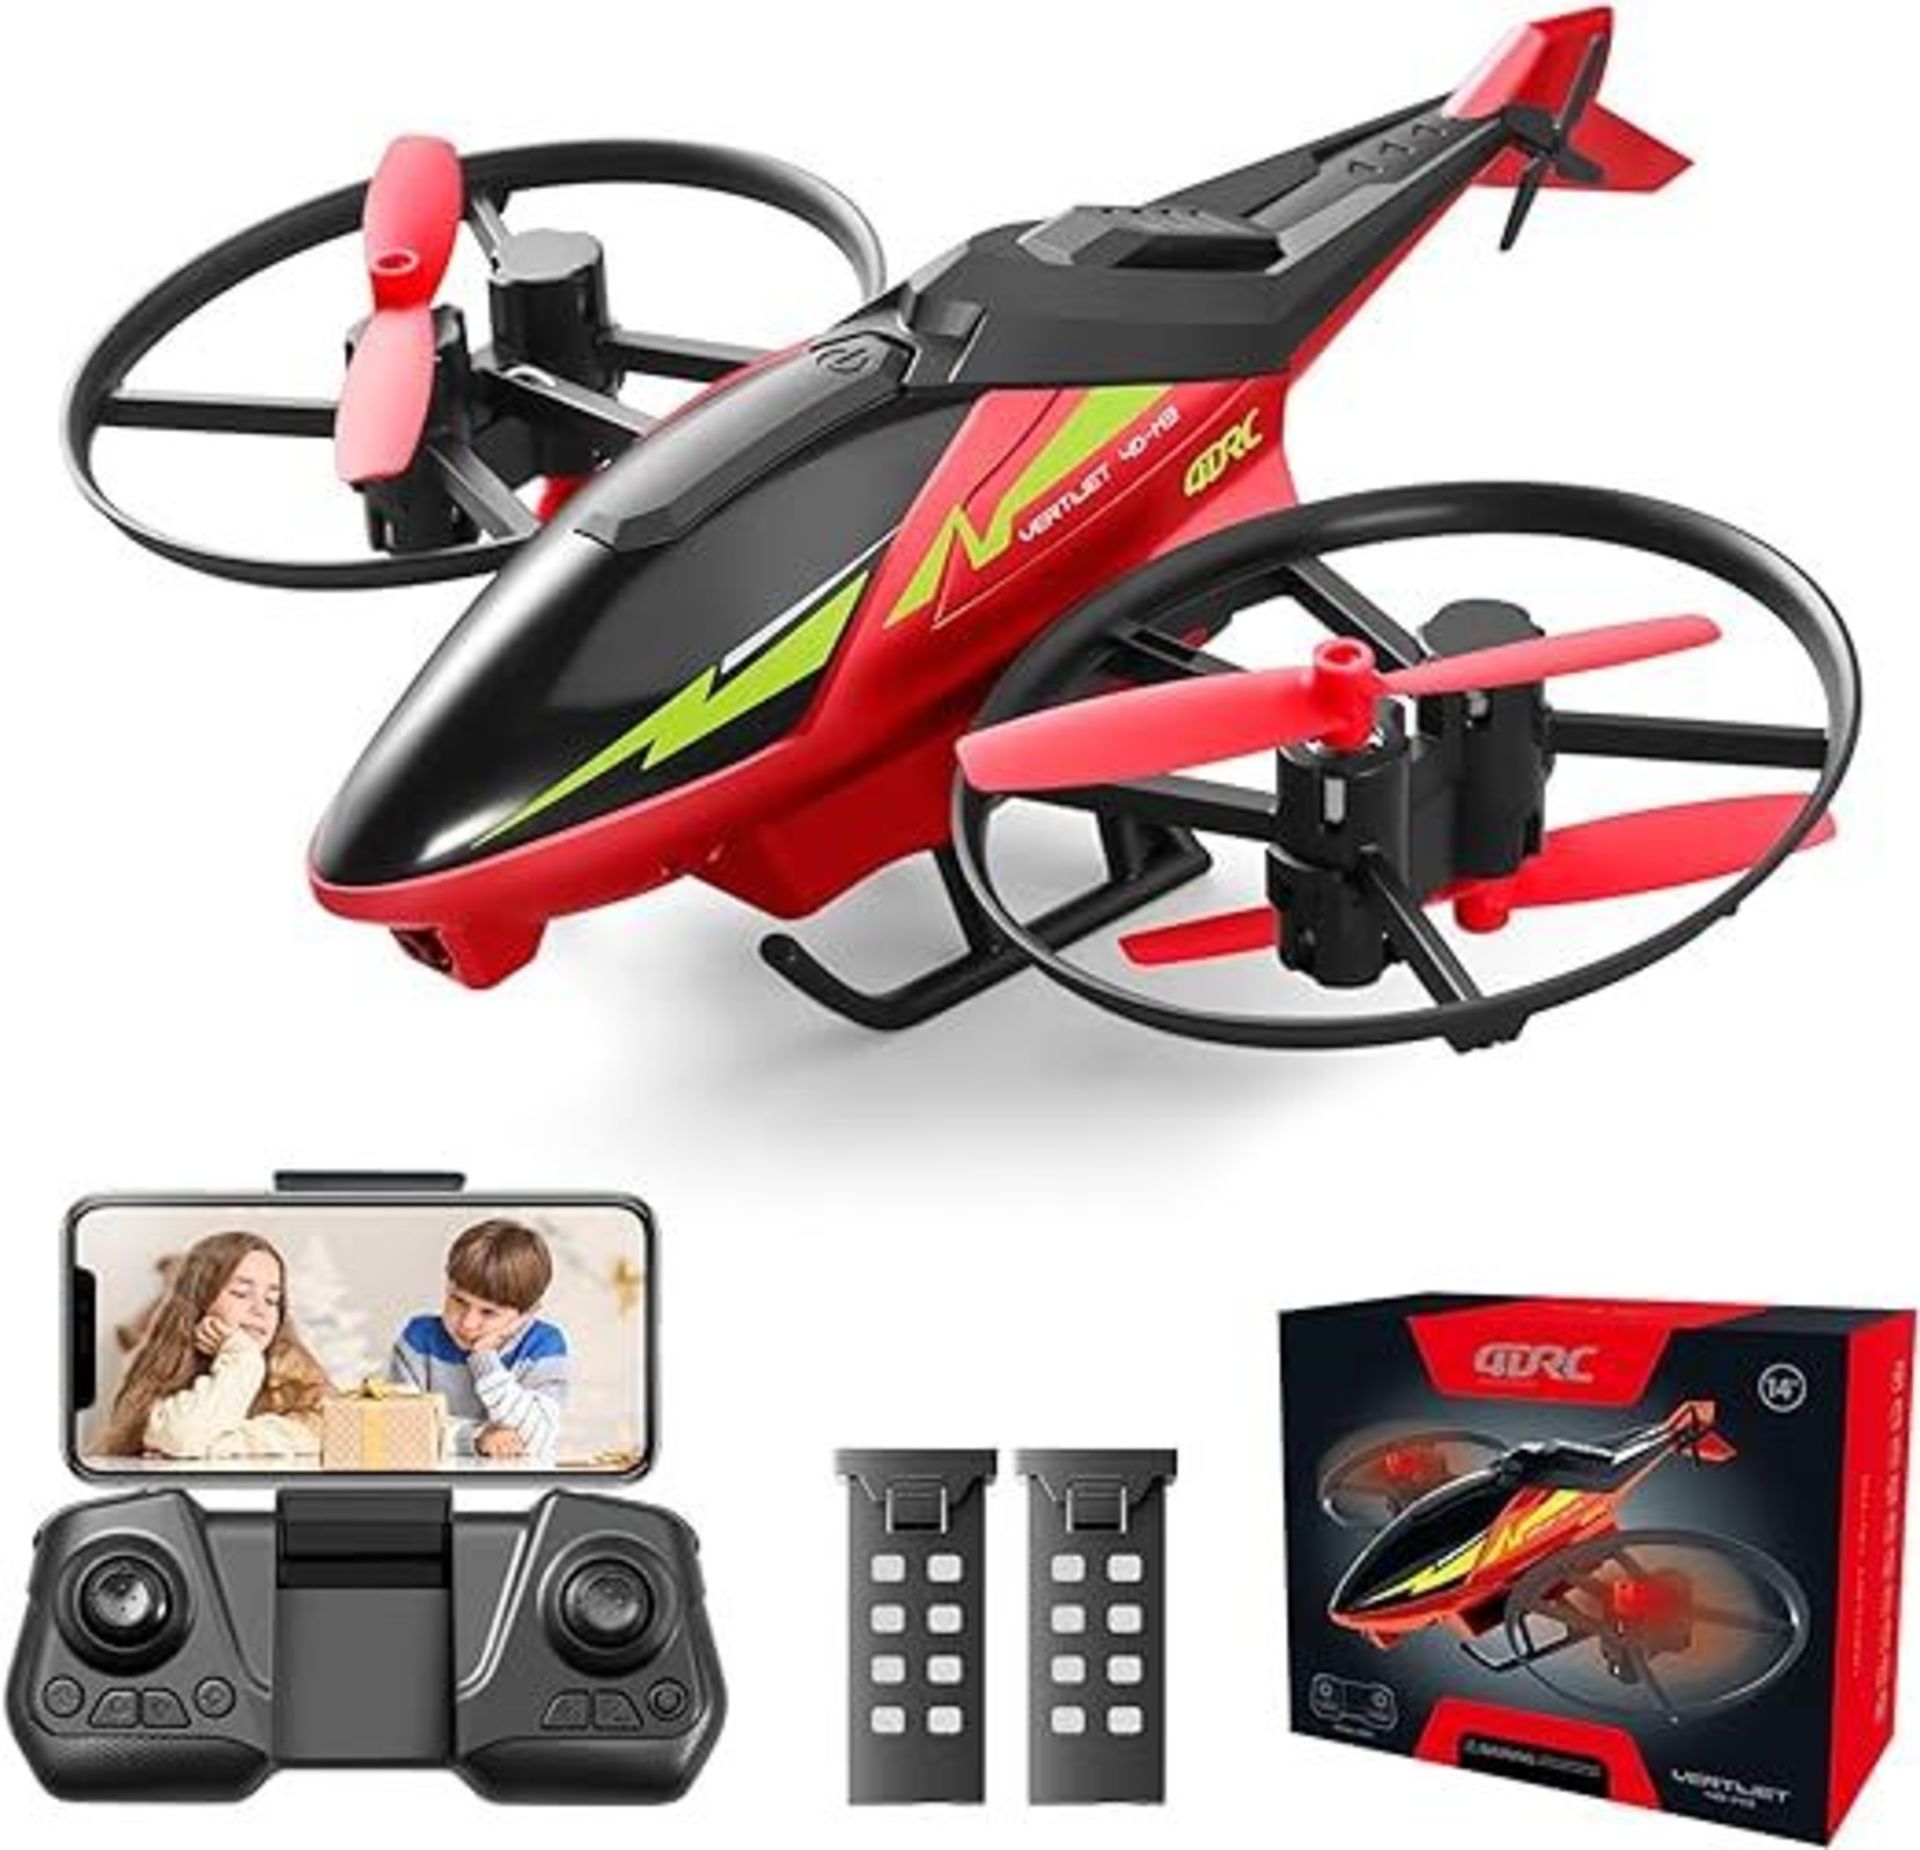 2 x 4DRC M3 Helicopter Drone with 1080p Camera. - ROW7. RRP £71.99 each ,HD FPV Live Video RC